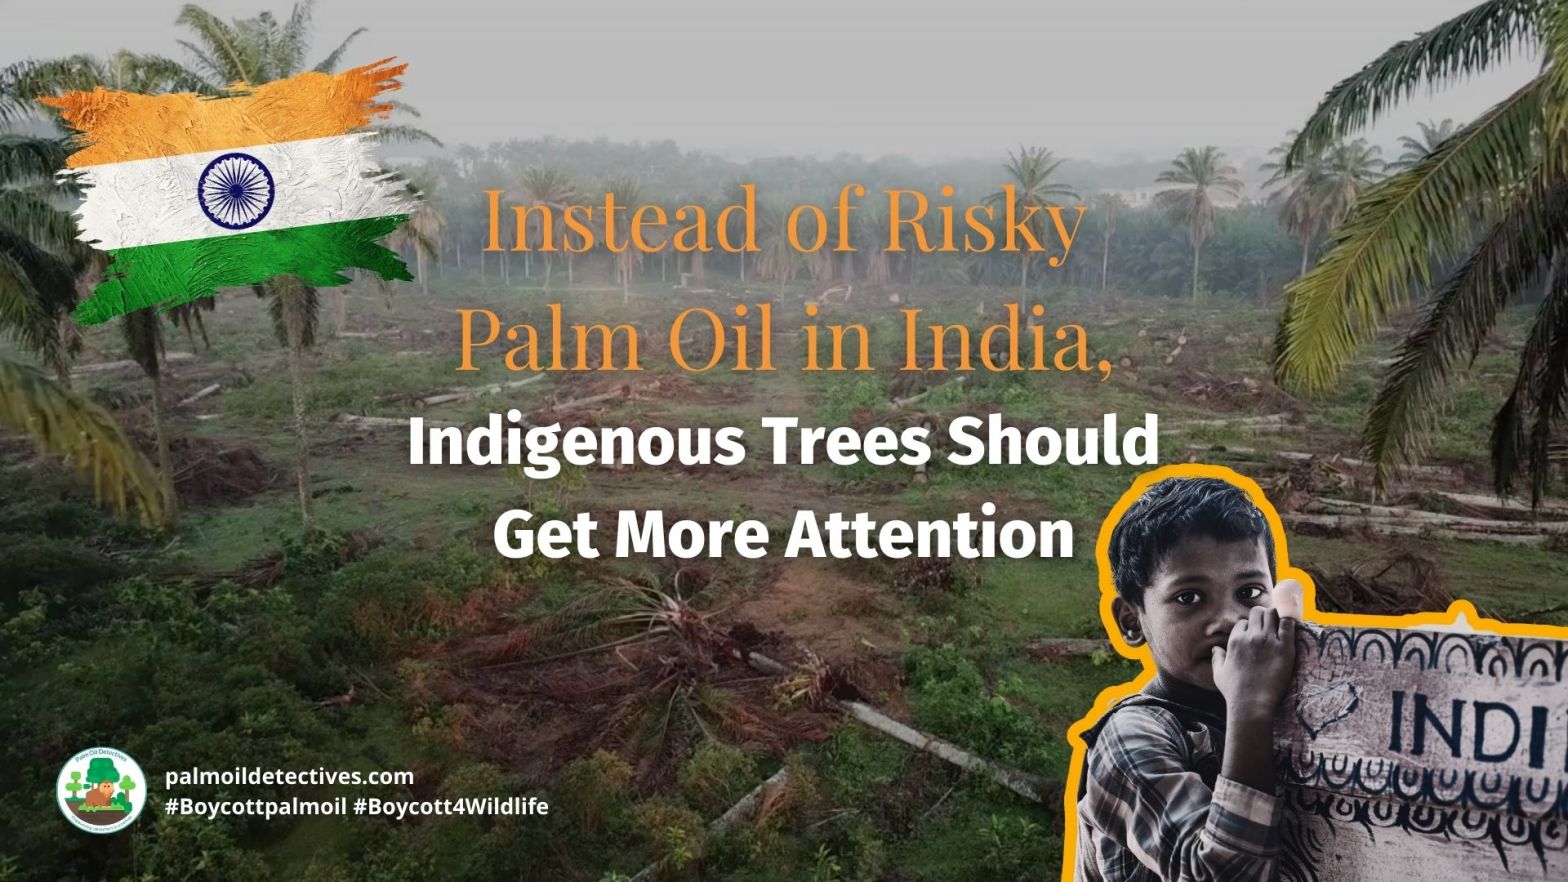 Instead of Risky Palm Oil in India, Indigenous Trees Should Get More Attention